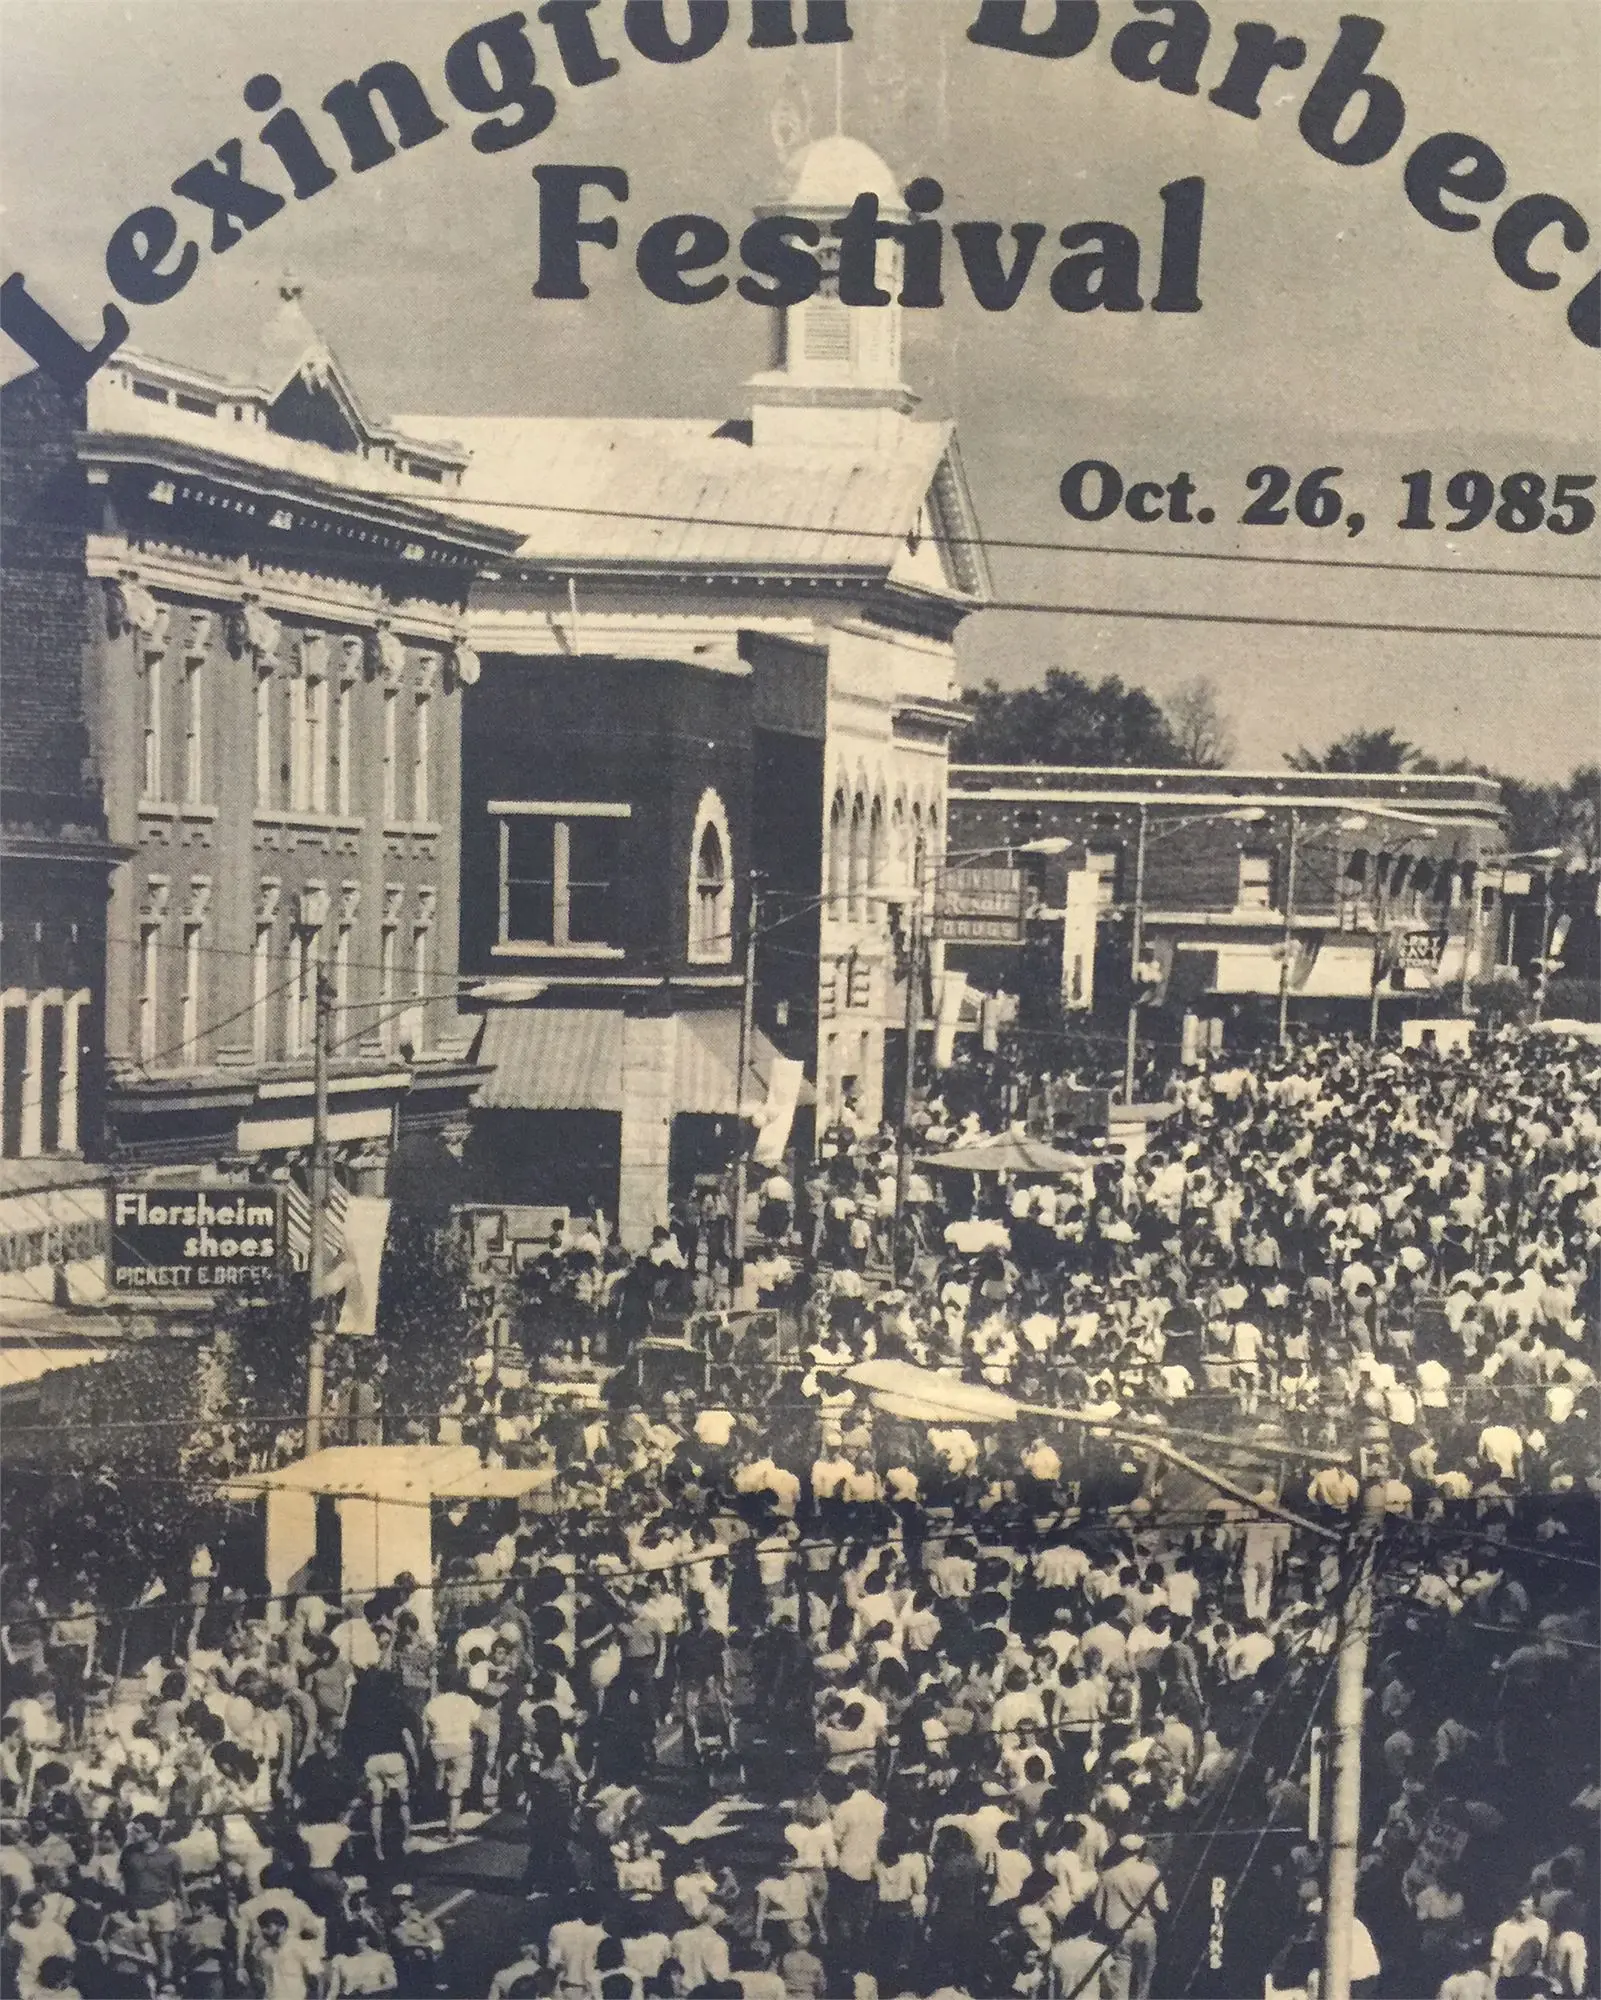 smoked bbq festival - When was the first BBQ festival in Lexington North Carolina